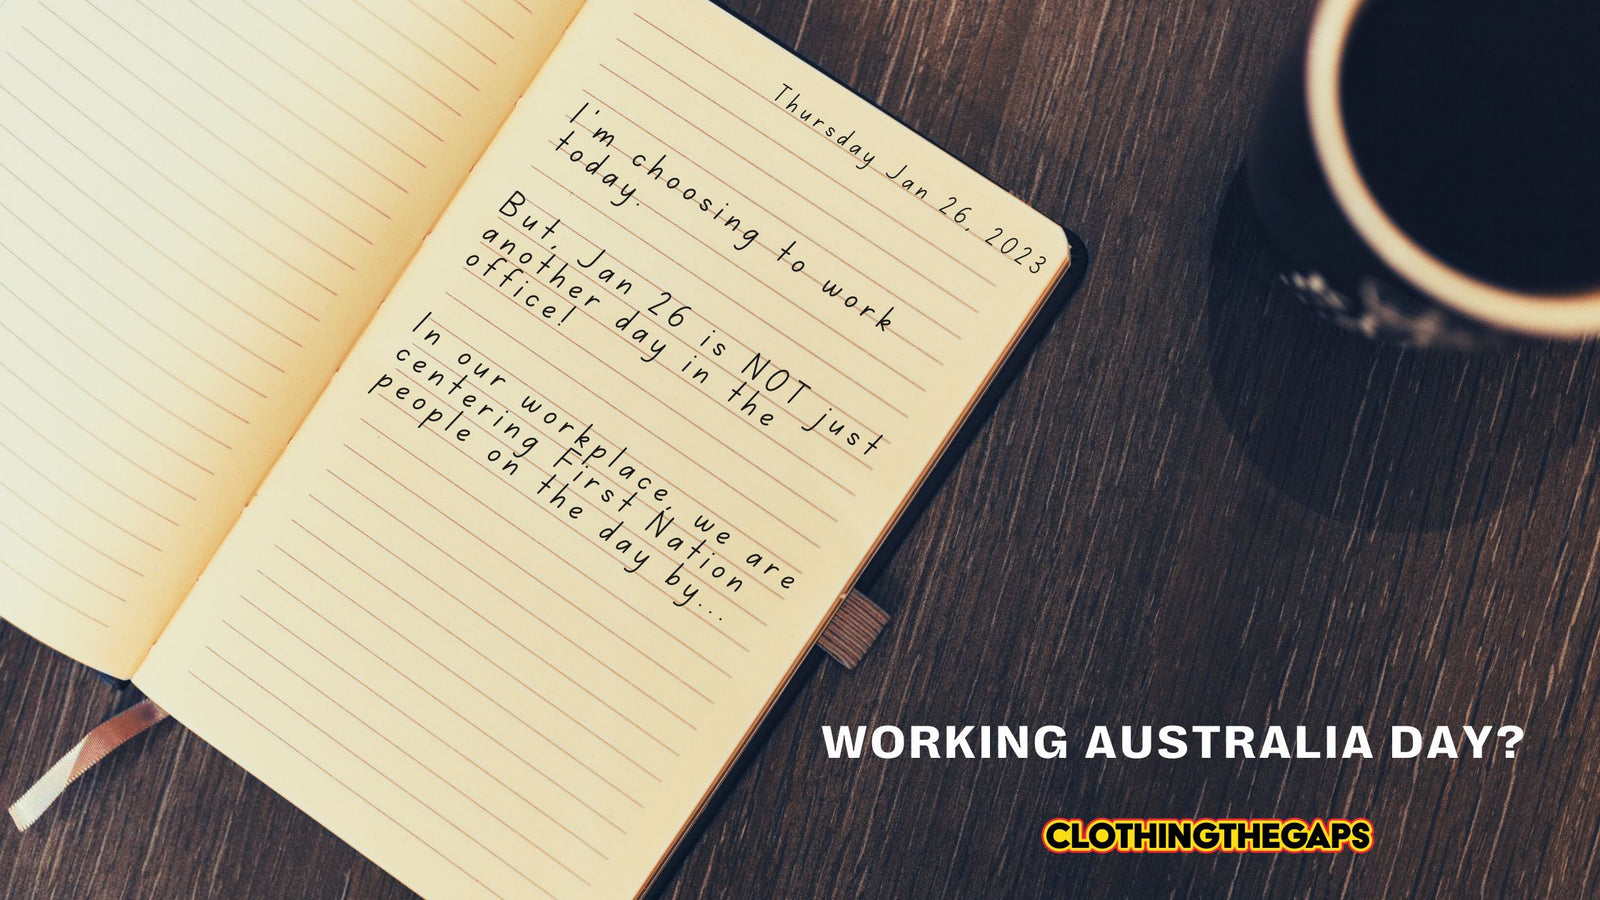 Working Australia Day? Not Just Another Day In The Office